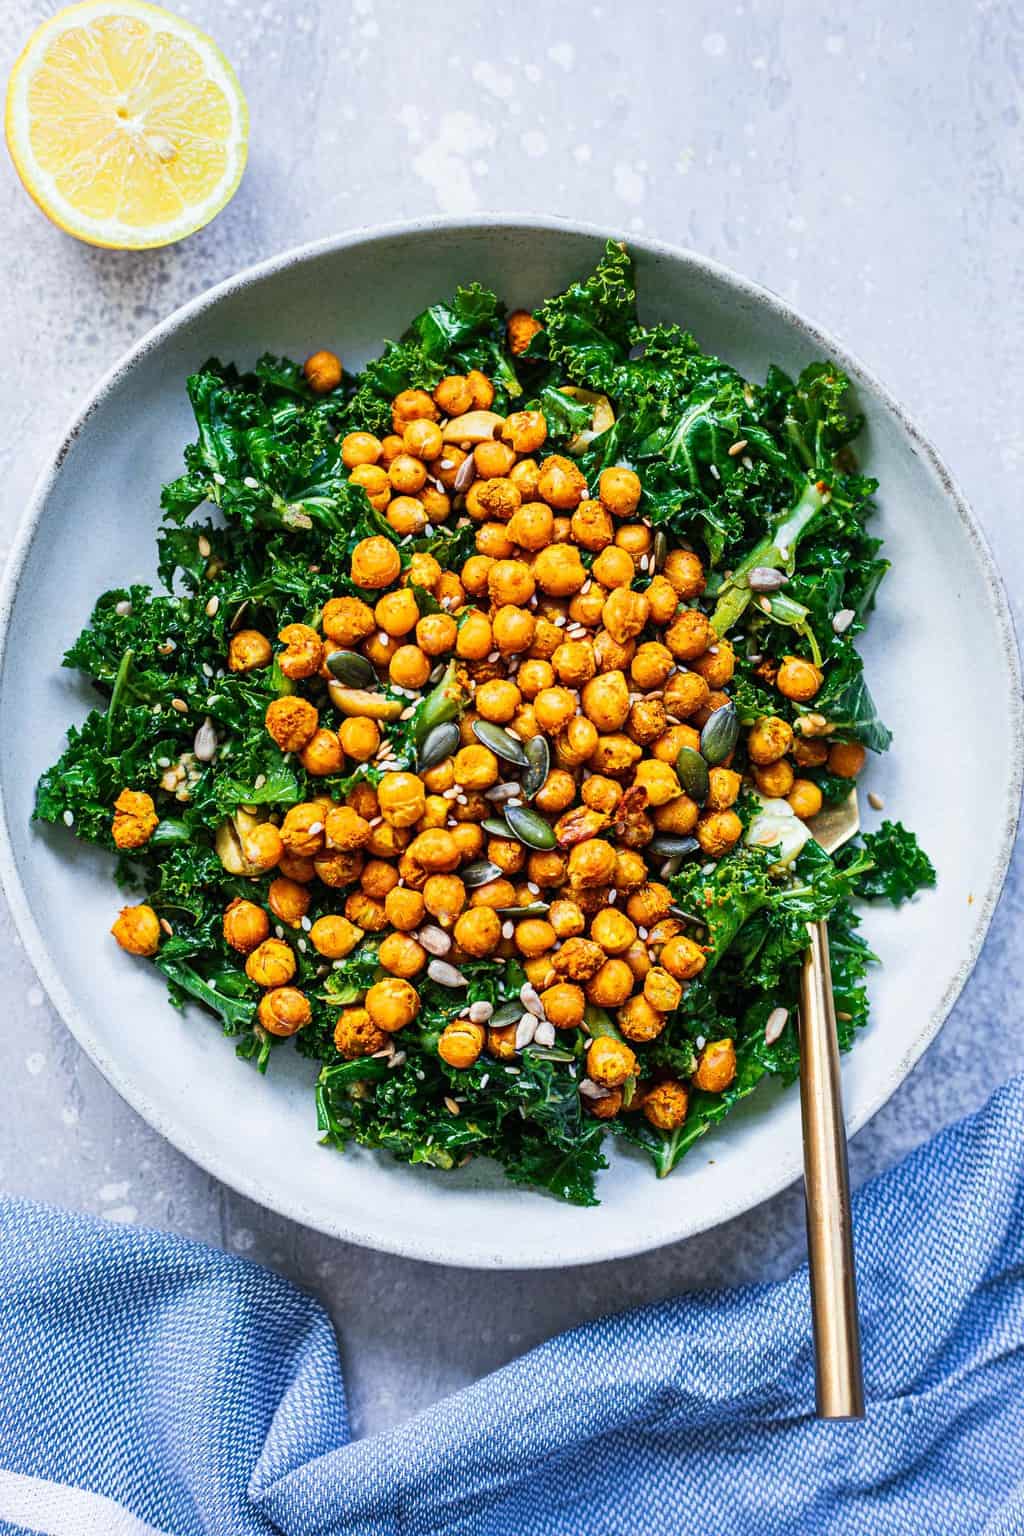 Kale salad with chickpeas